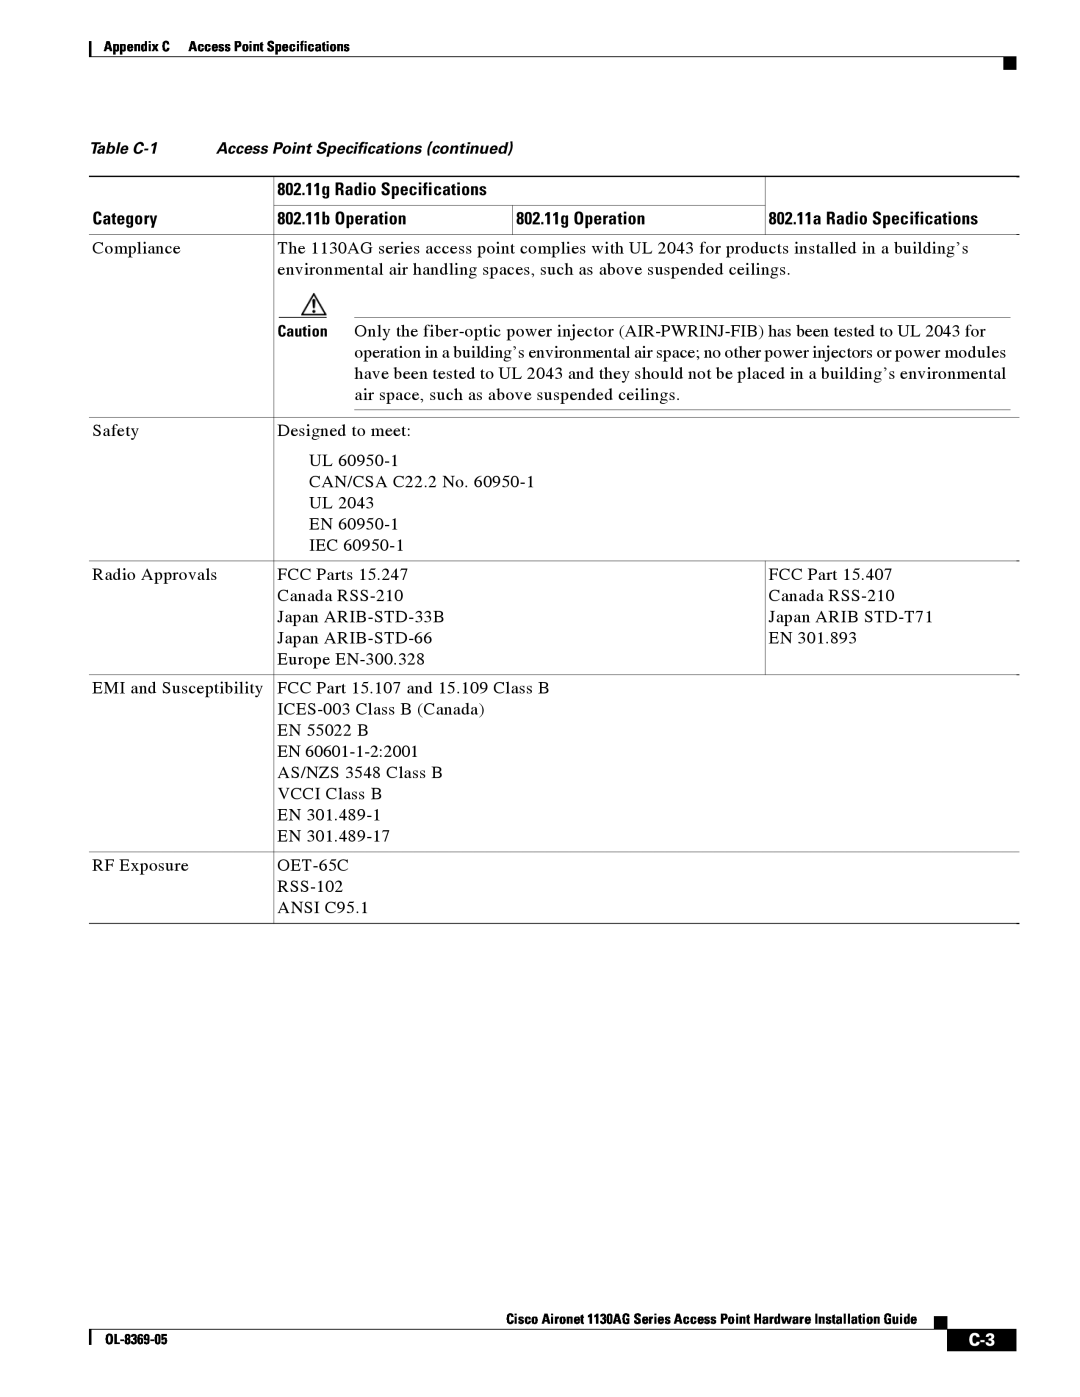 Cisco Systems 1130AG manual Category, 802.11b Operation, 802.11g Operation, 802.11a Radio Specifications 